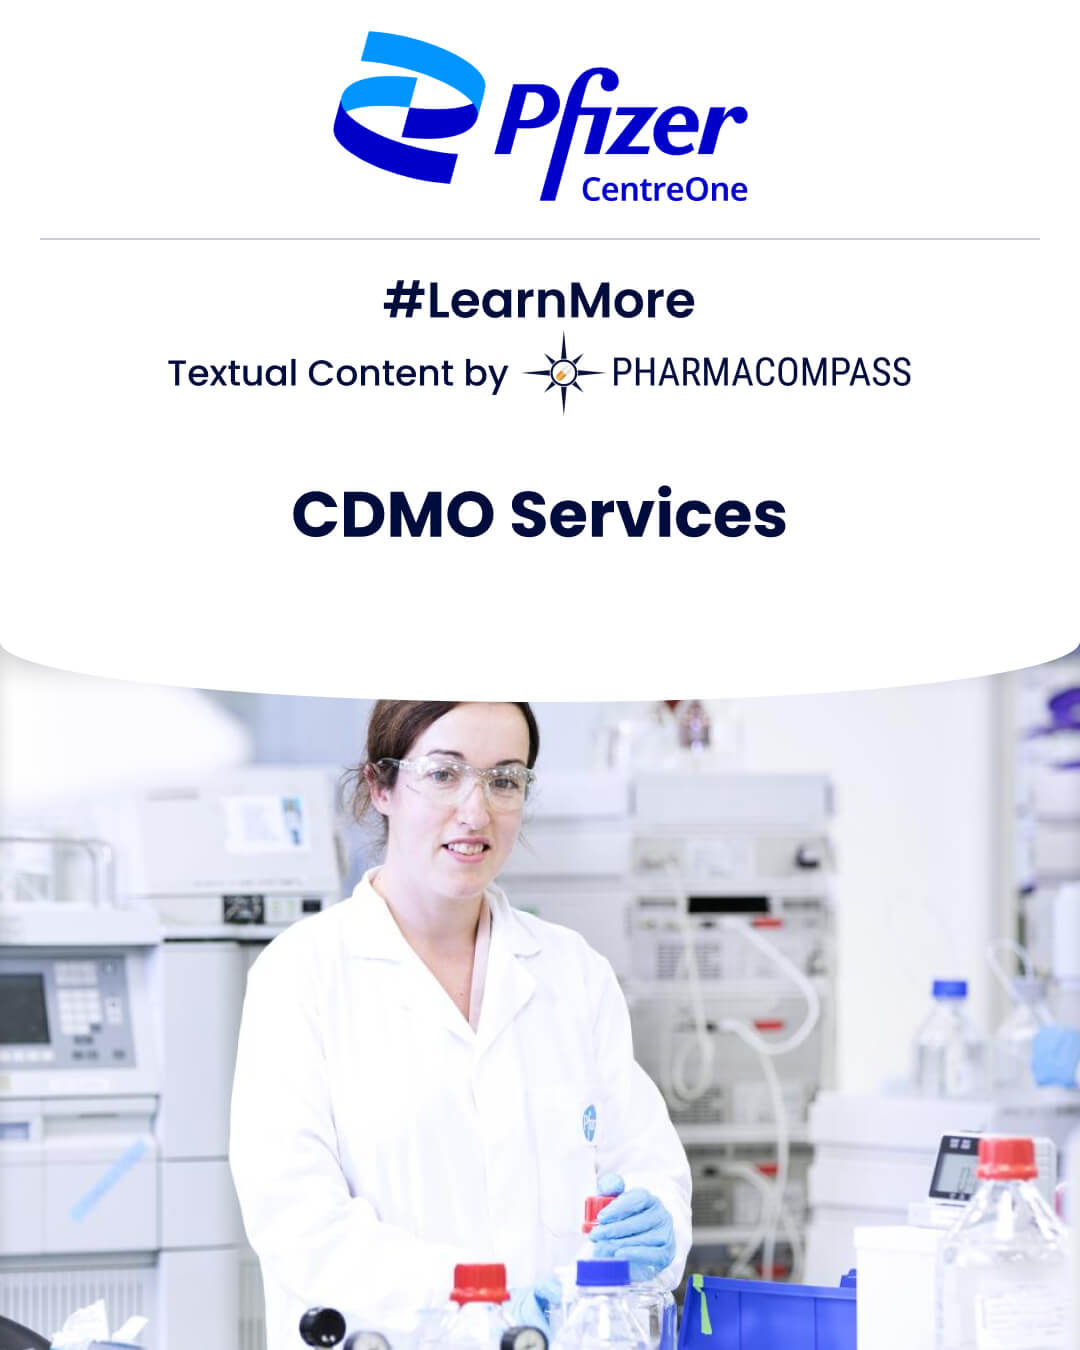 Overview of CDMOs (contract development & manufacturing organizations) & more on Pfizer CentreOne, a global CDMO & a leading supplier of APIs.